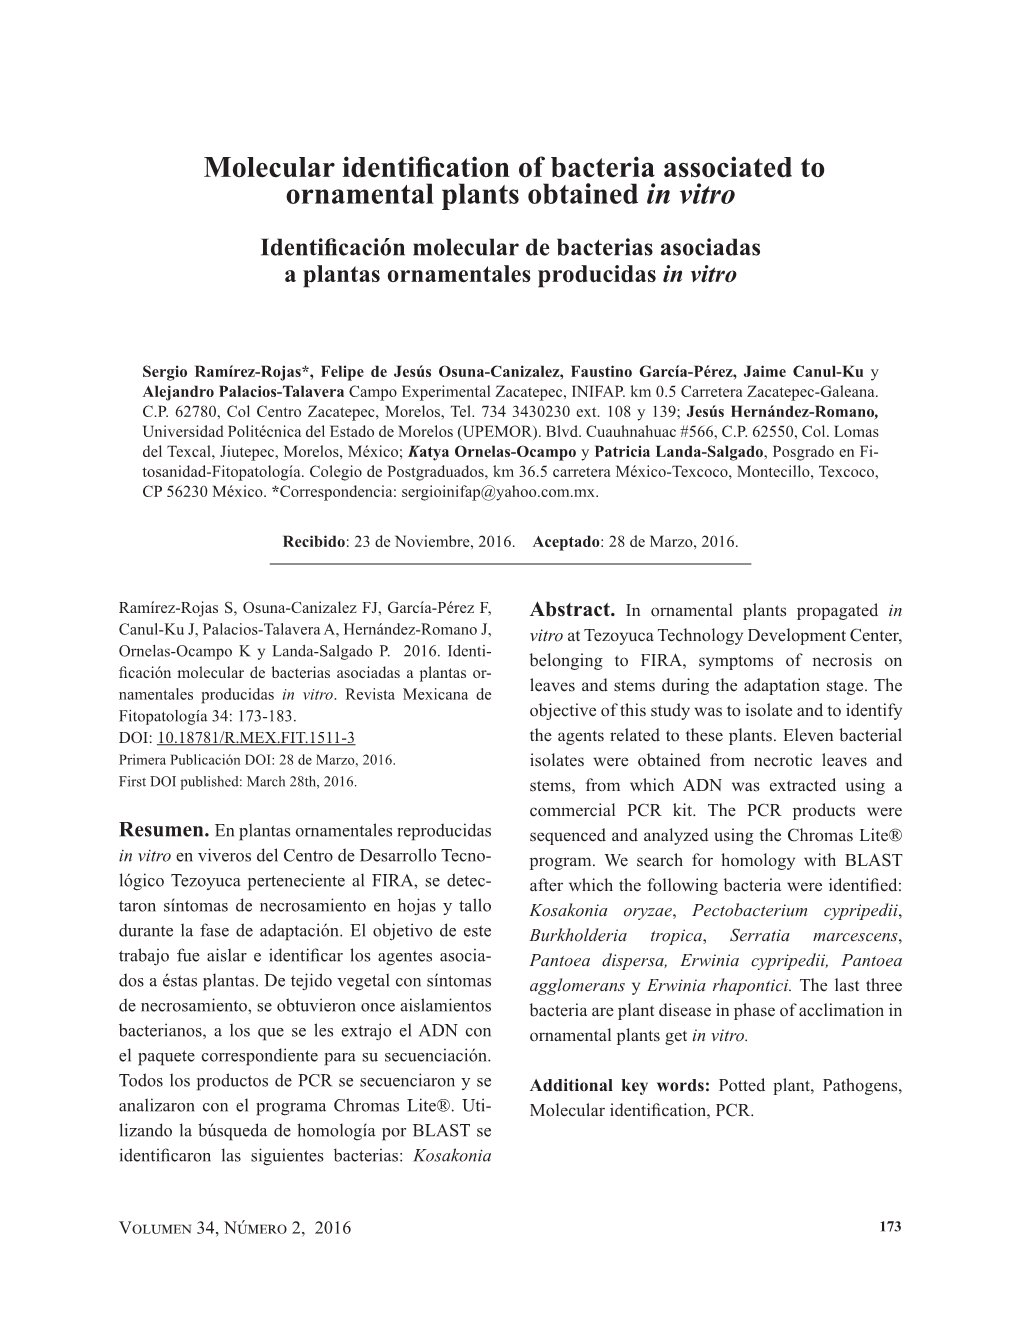 Molecular Identification of Bacteria Associated to Ornamental Plants Obtained in Vitro